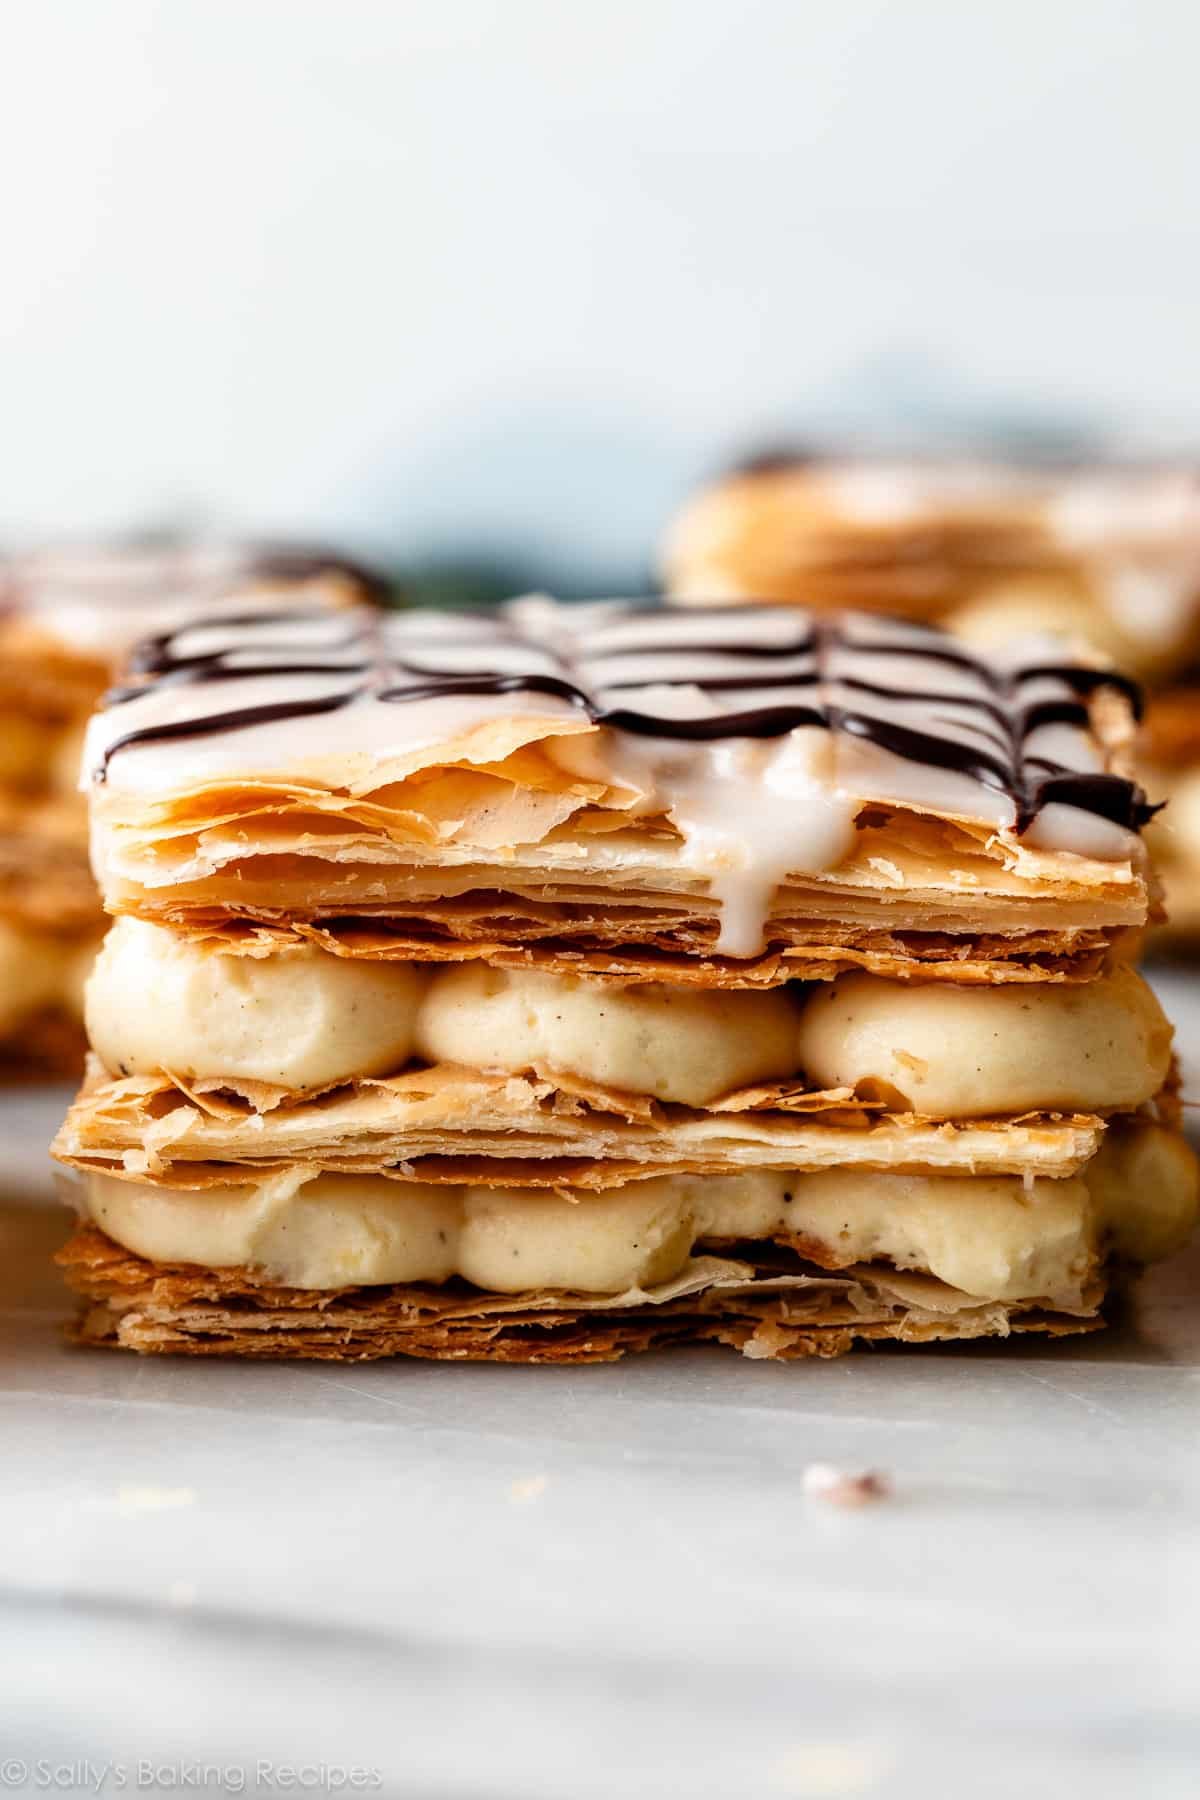 straight on photo of 3 layered puff pastry and pastry cream layers.